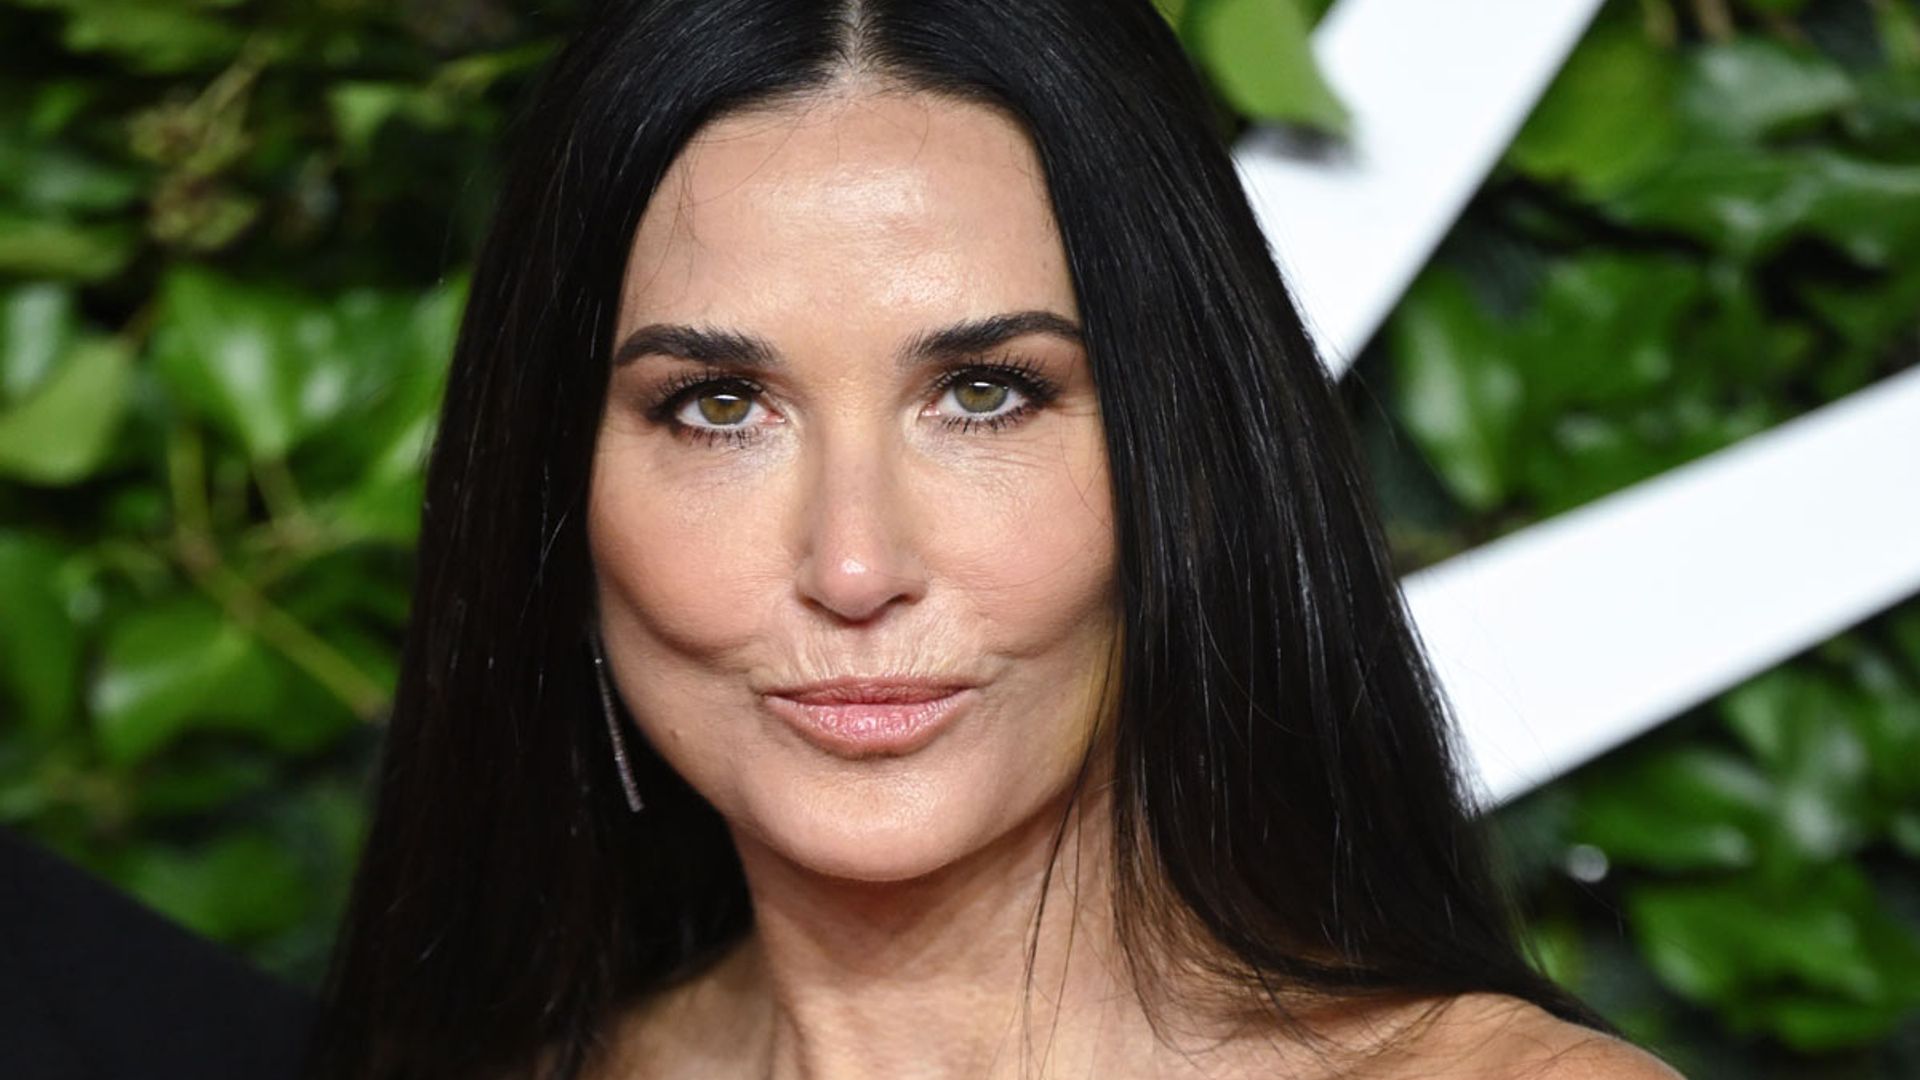 Demi Moore's glamorous airport style turns heads as she returns home for the holidays